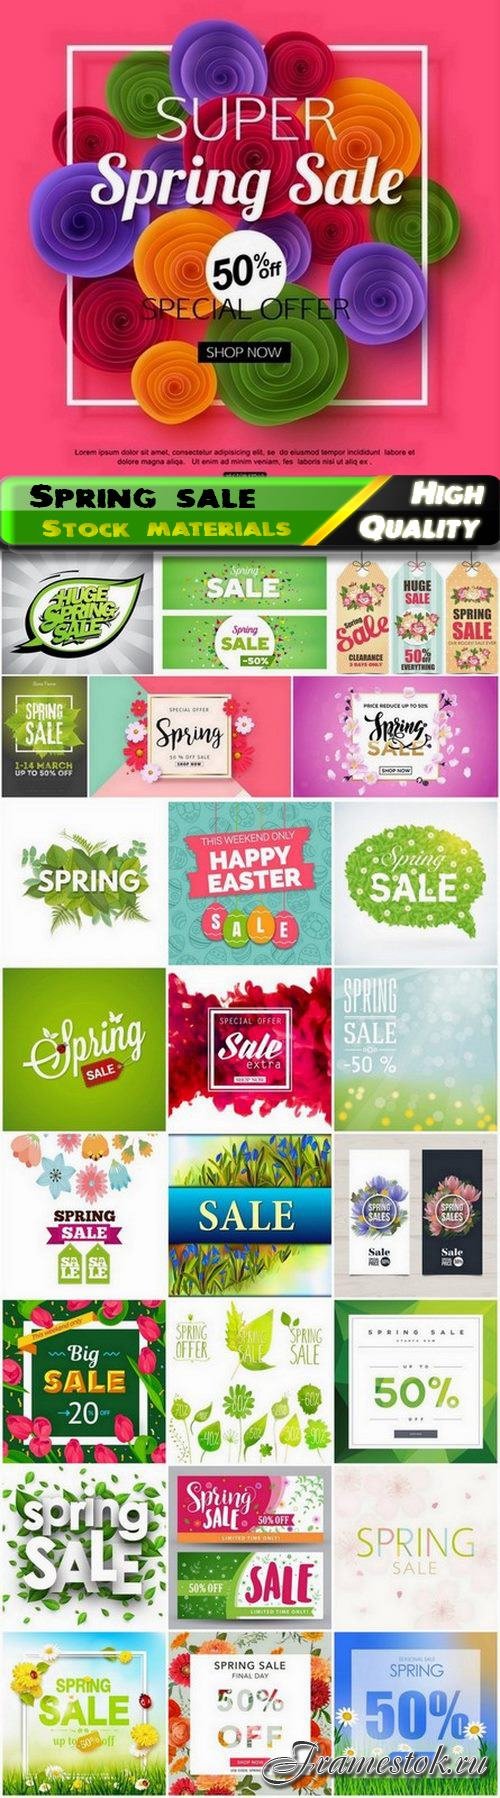 Business flyer poster and card for spring sale and discount 2 25 Eps